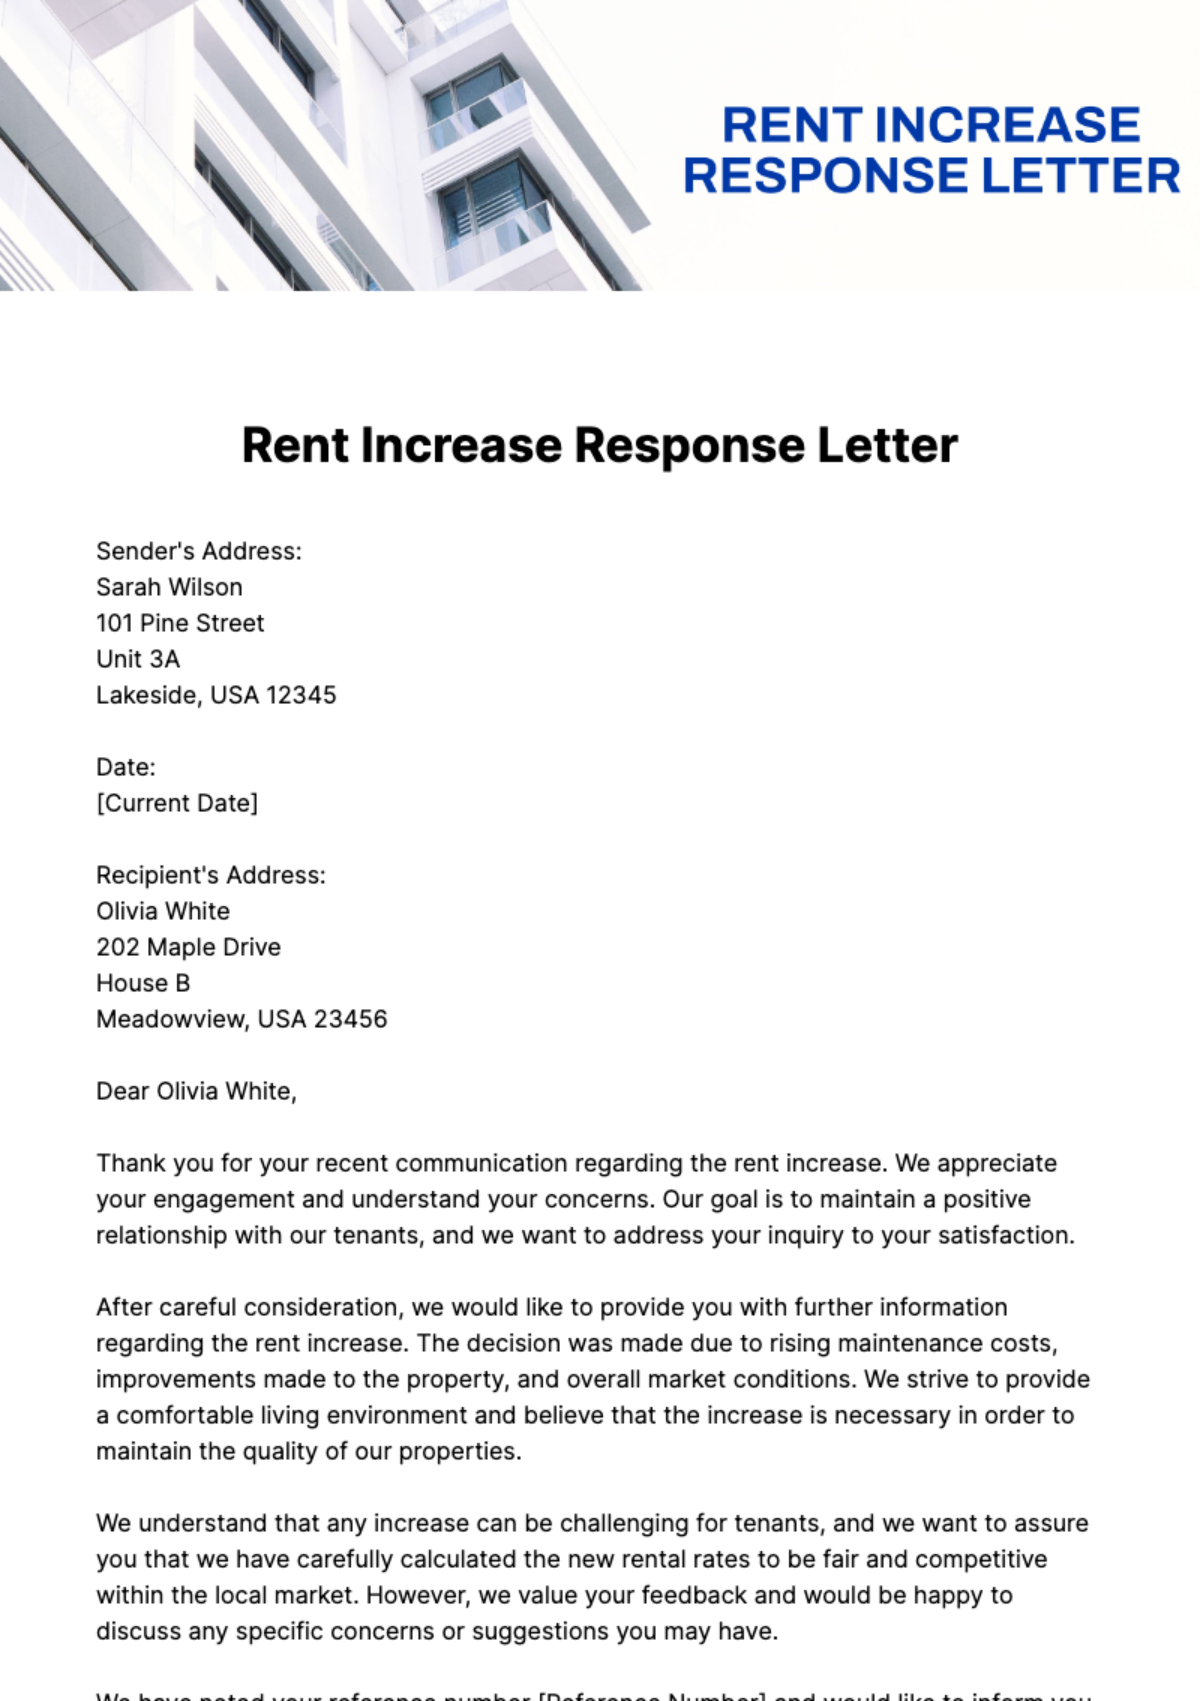 Rent Increase Response Letter Template